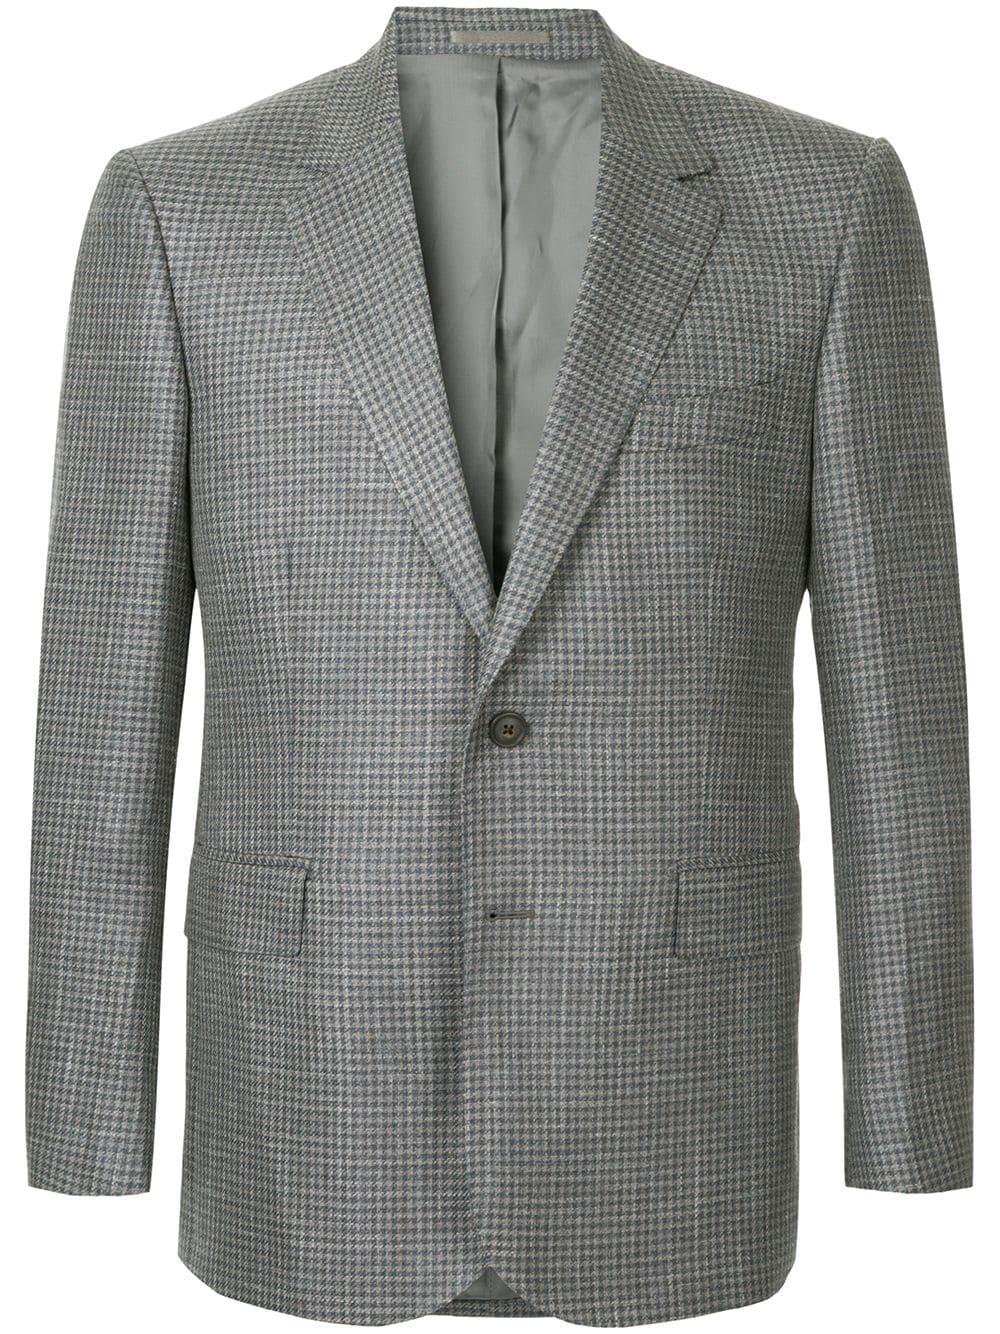 Gieves & Hawkes Wool Formal Fitted Blazer in Grey (Gray) for Men - Lyst